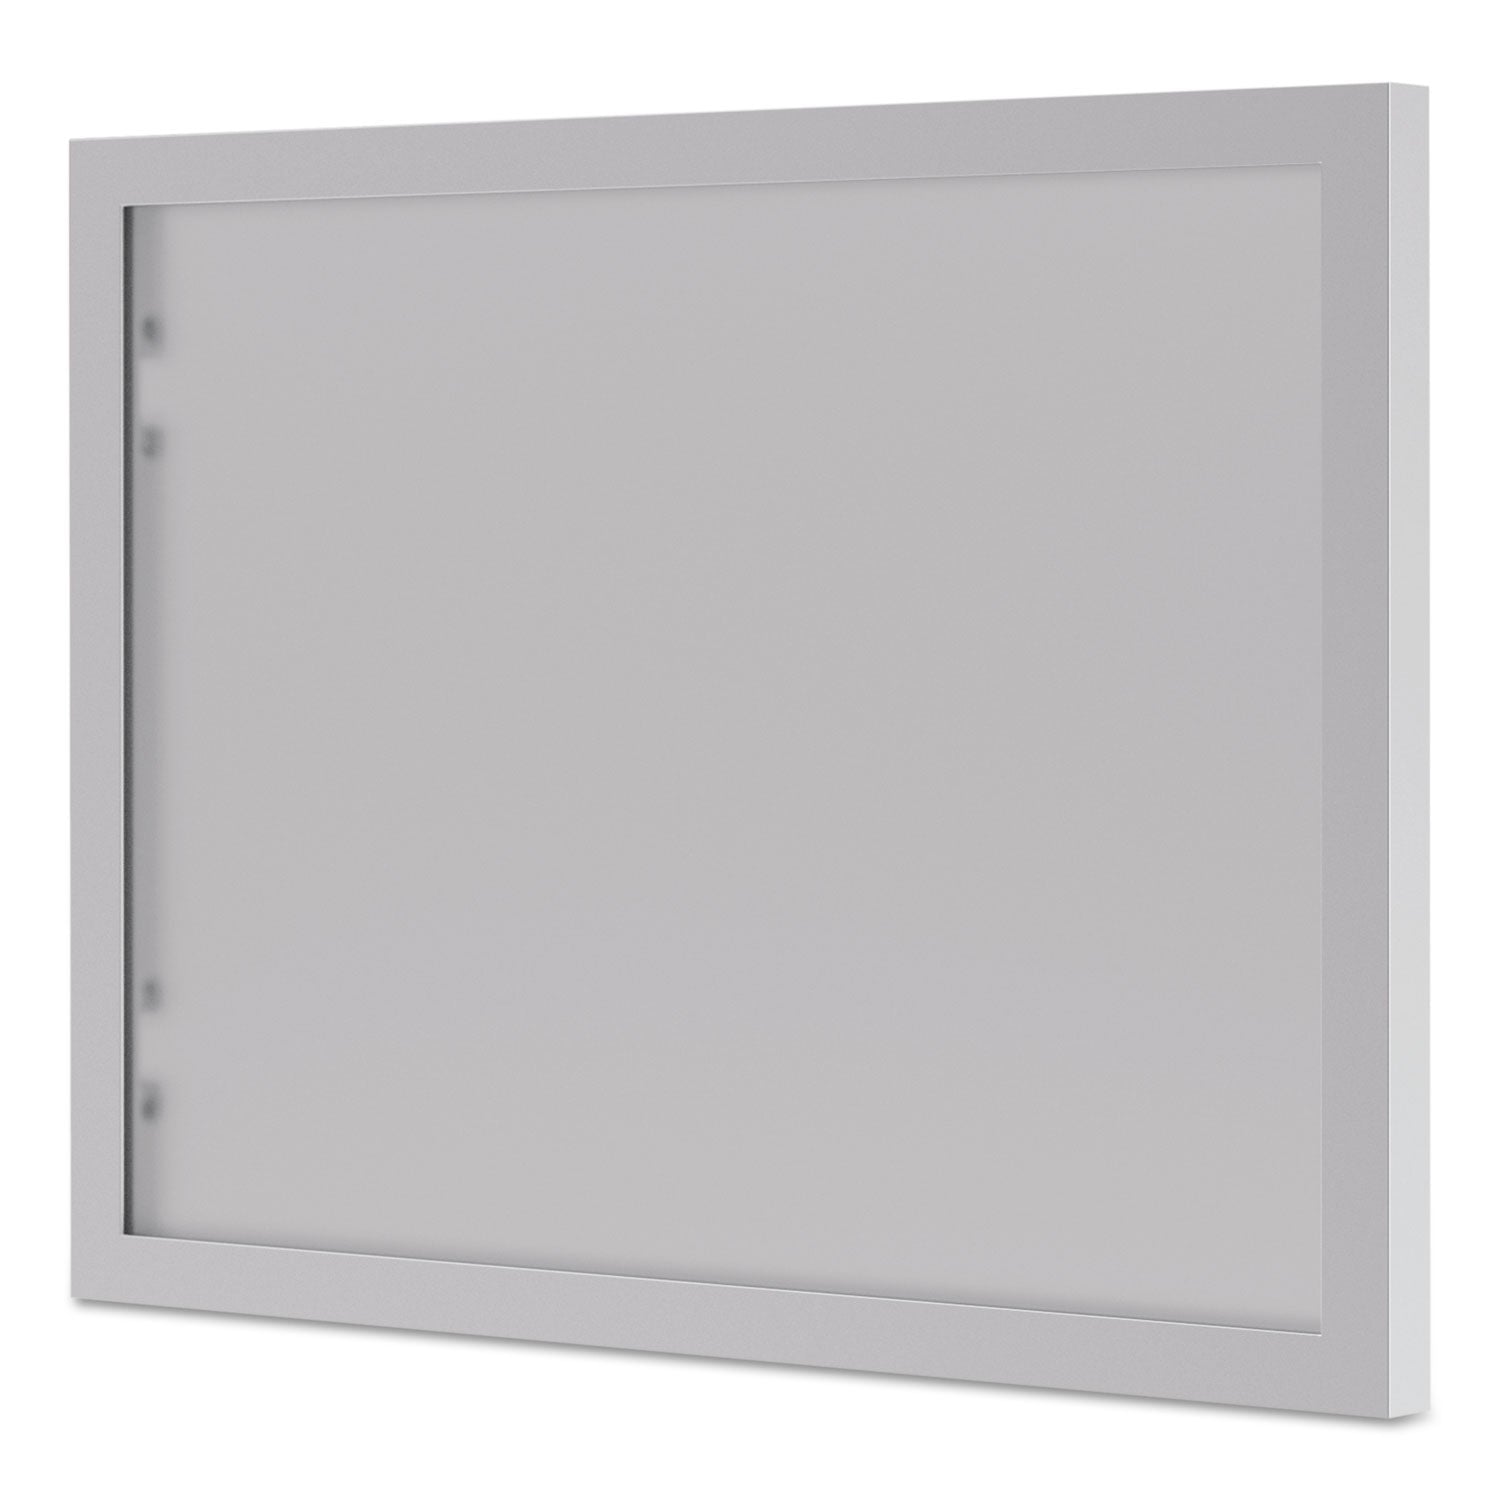 bl-series-hutch-doors-glass-1325w-x-1738h-silver-frosted_bsxbl72hdg - 1